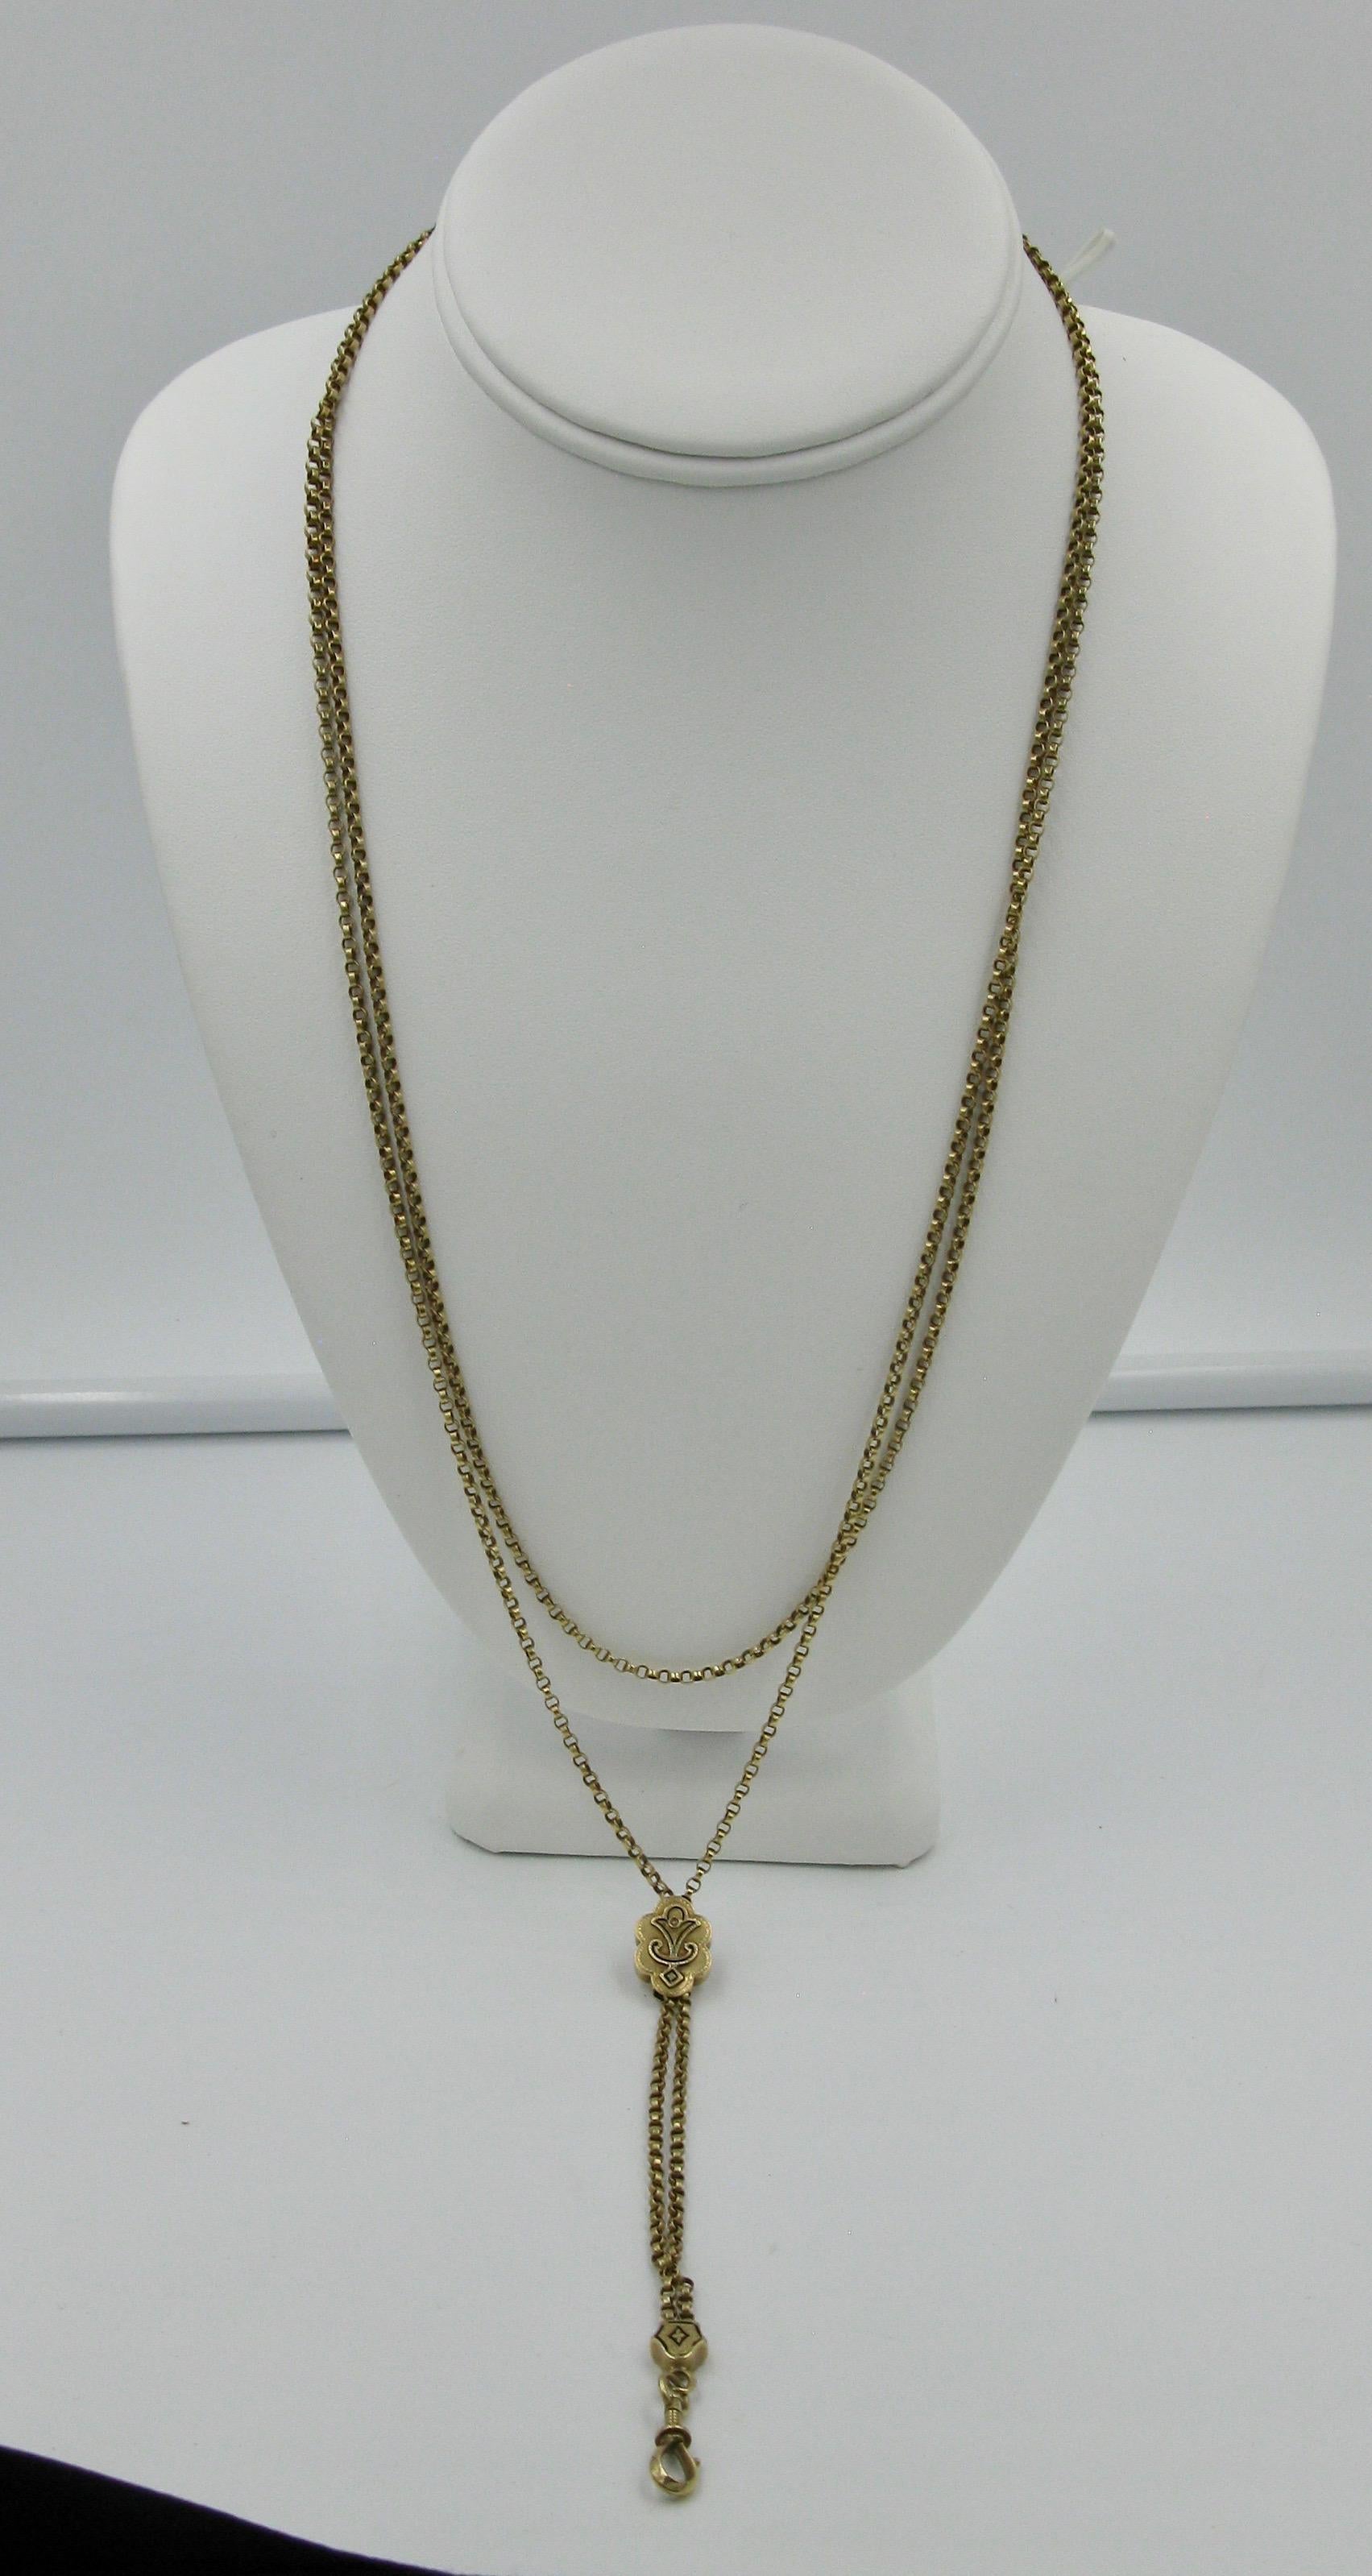 A stunning antique Victorian 56 Inch long 14 Karat Gold Chain Necklace of great beauty.  The chain with an enamel and pearl decorated slide.  At the bottom is a dog clip with a very fine design which opens and closes with a screw design that assures